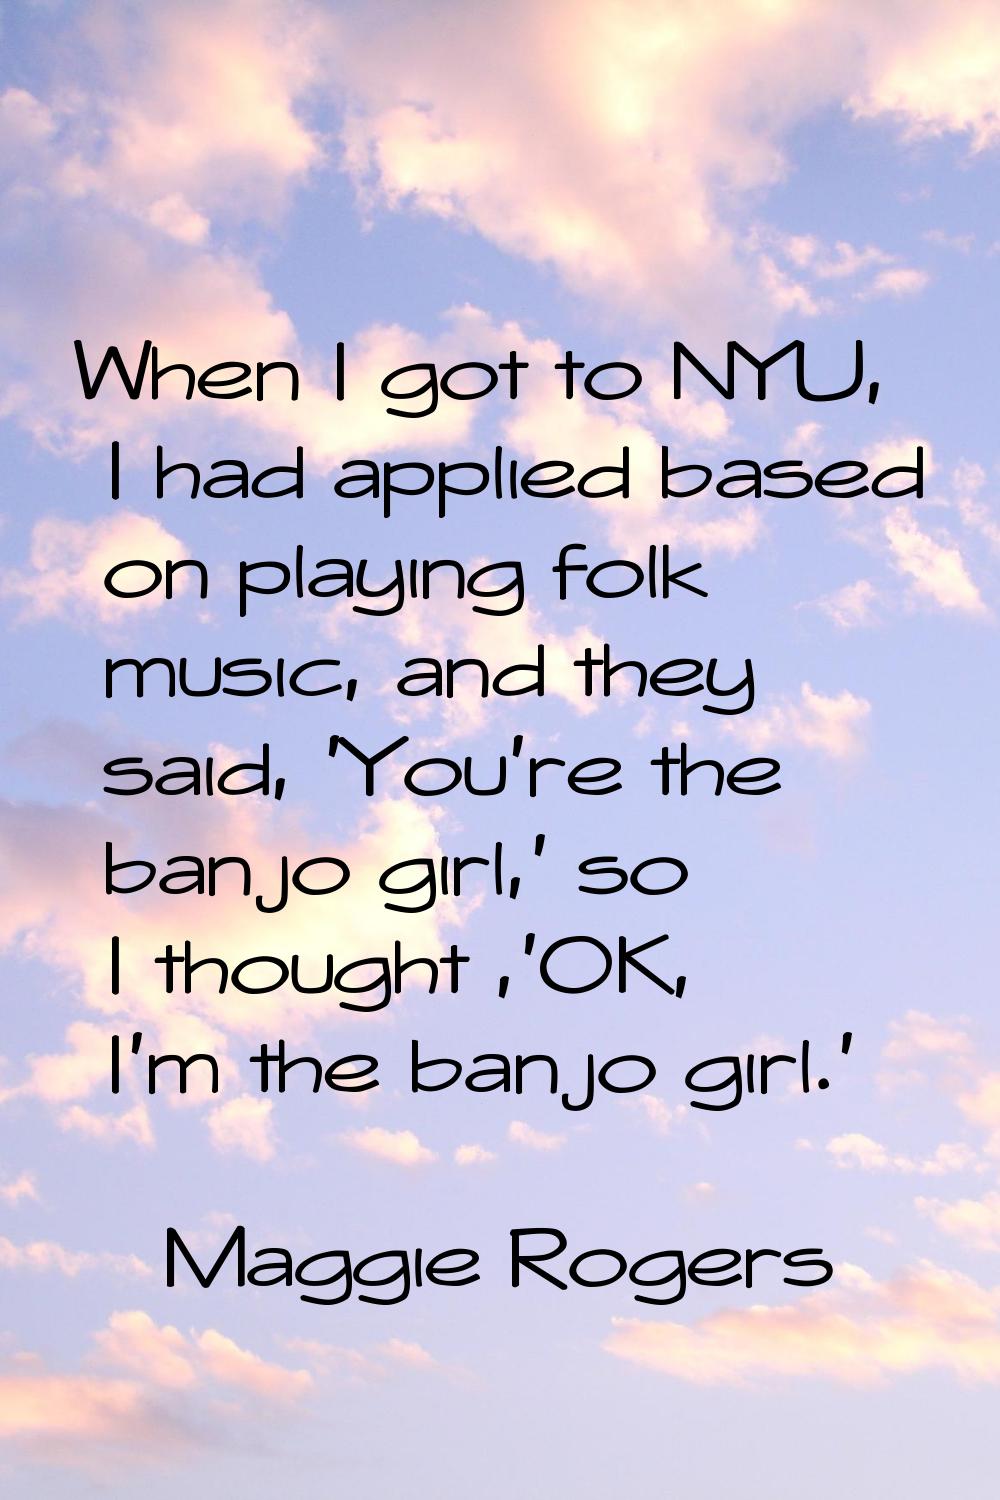 When I got to NYU, I had applied based on playing folk music, and they said, 'You're the banjo girl